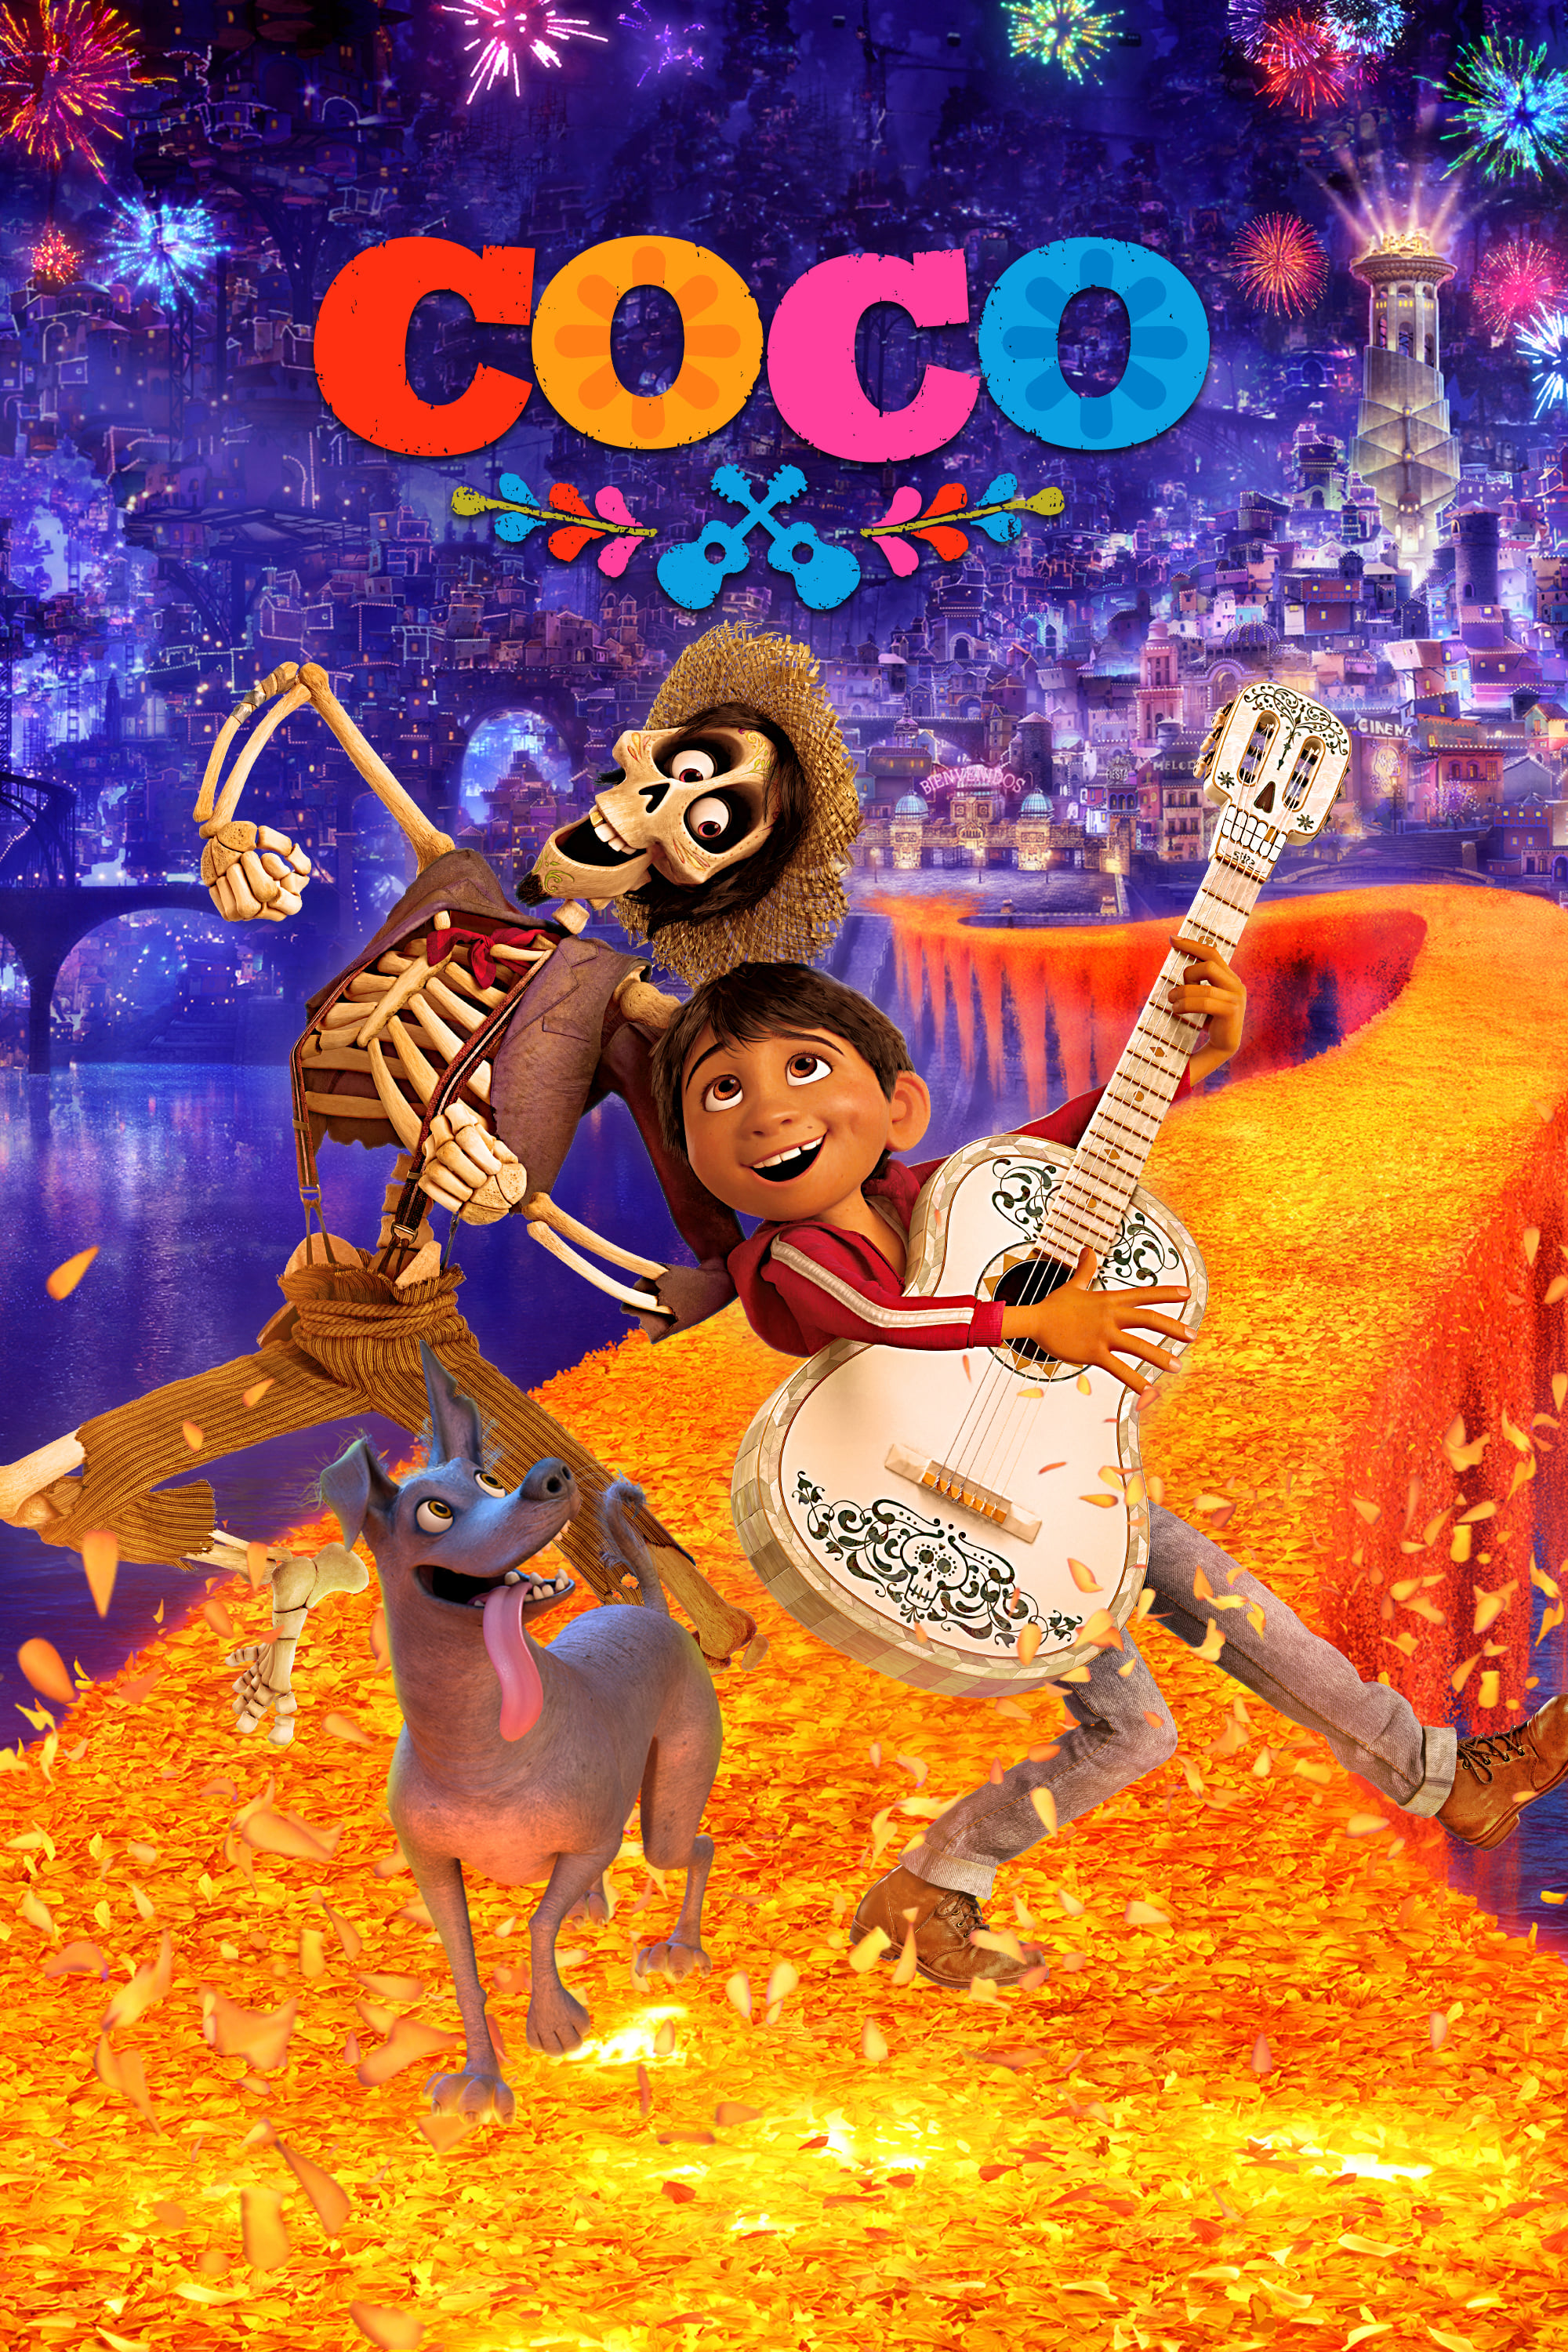 Colorful still from the movie Coco featuring a young boy with a guitar, a skeleton, and a dog